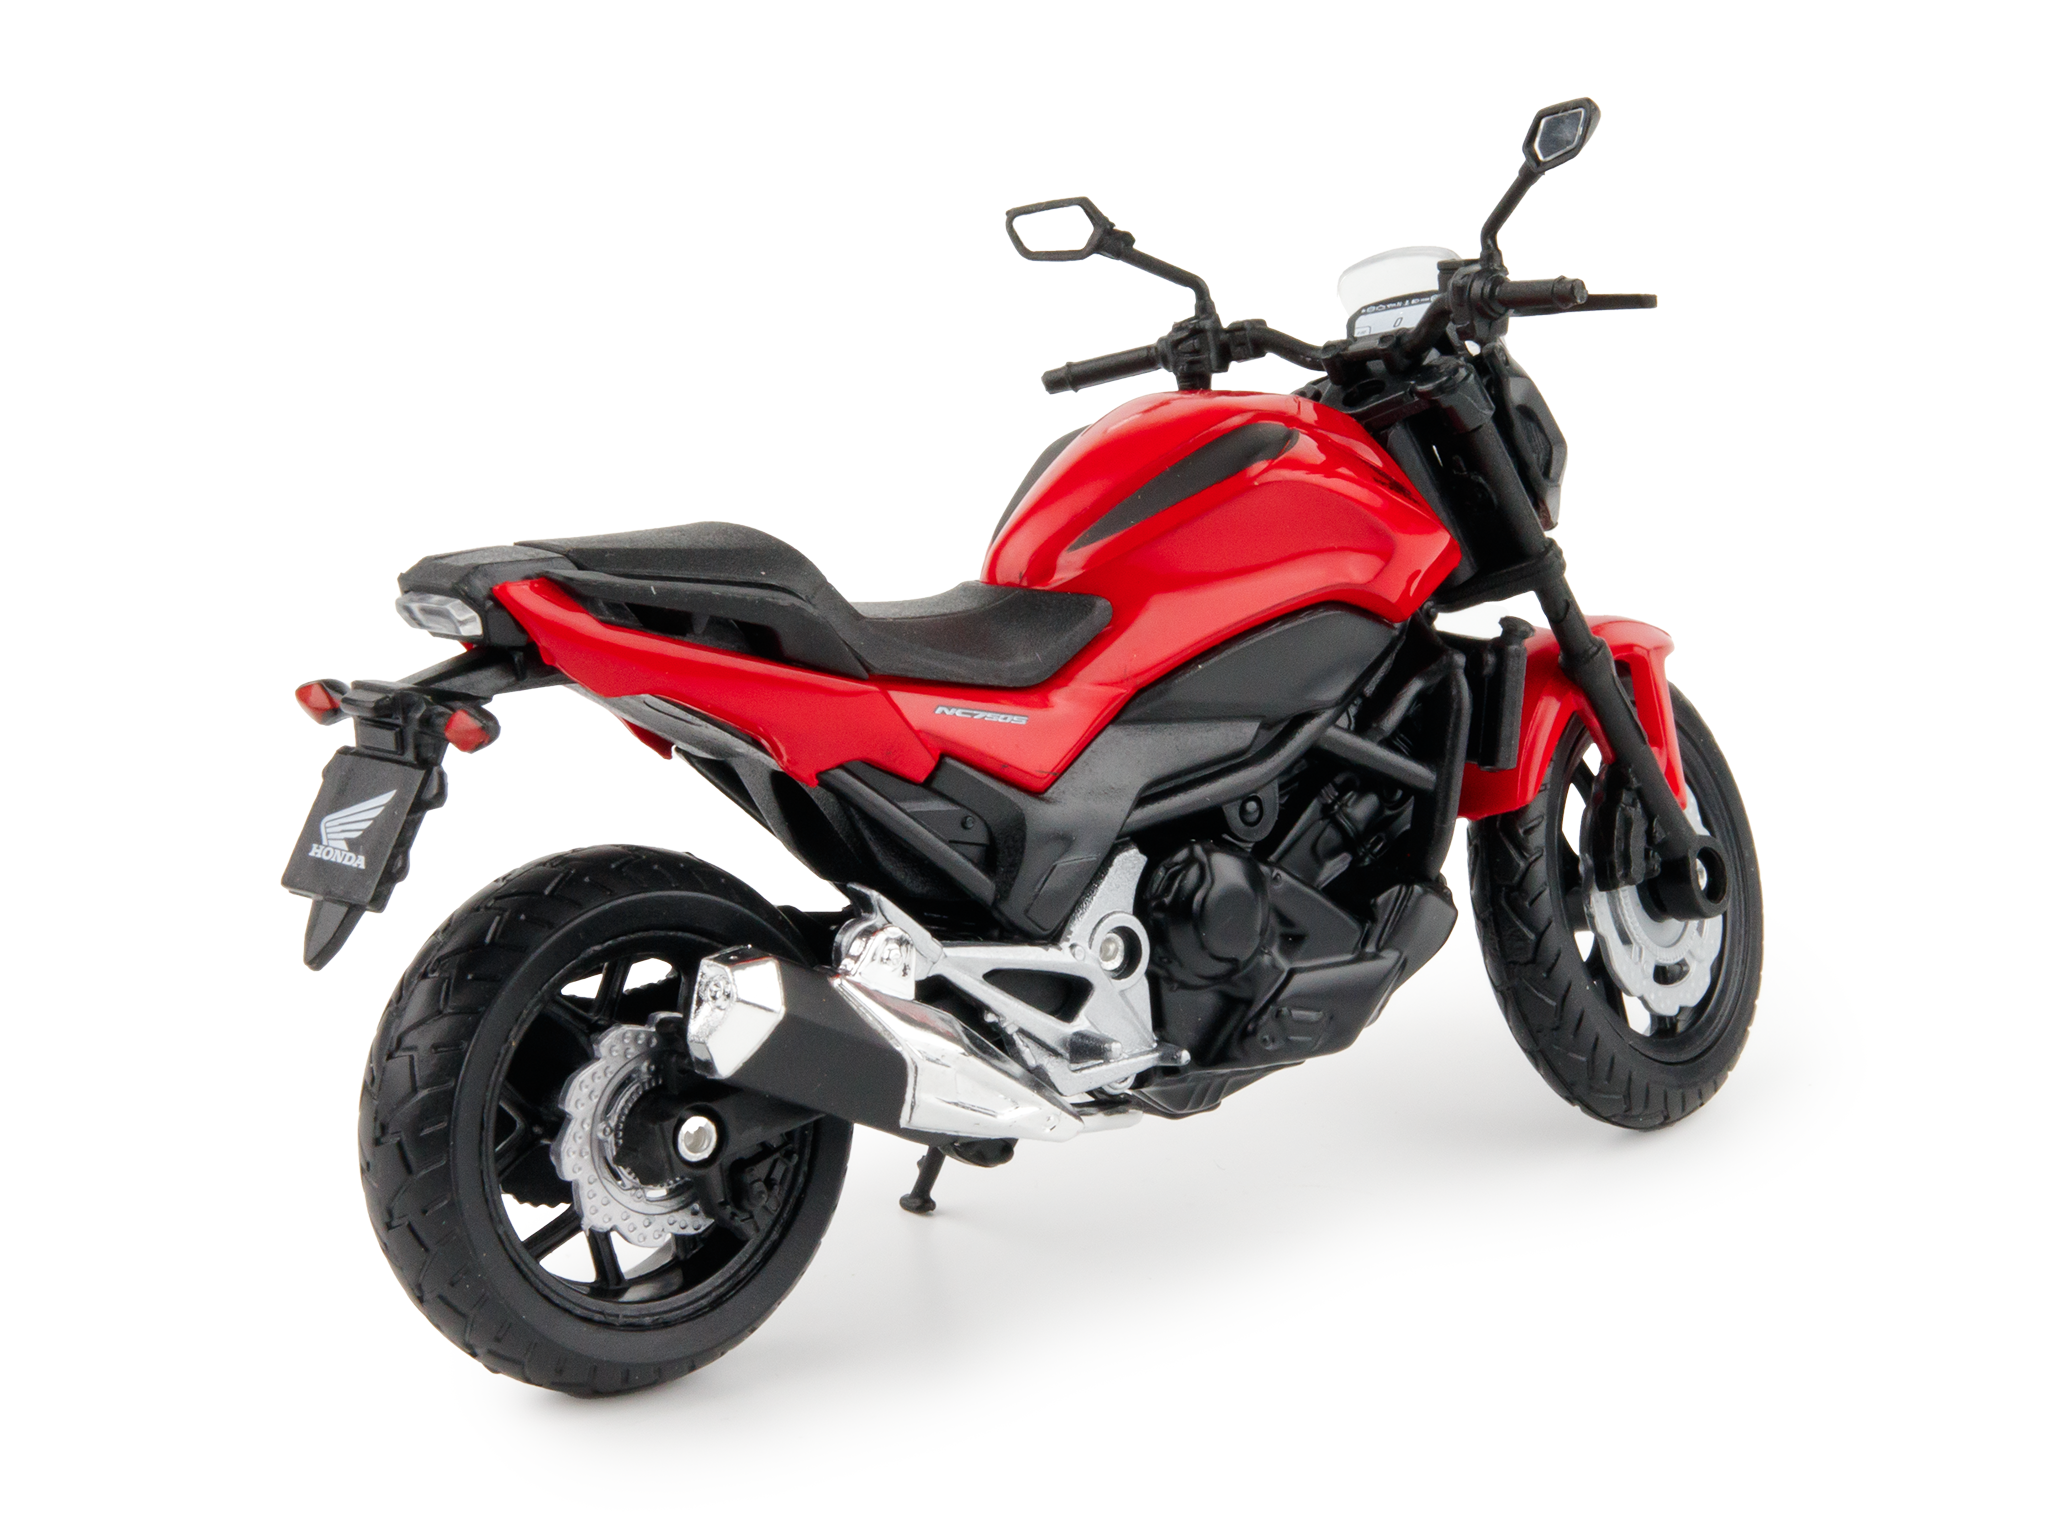 Honda NC750S 2018 red - 1:18 Scale Diecast Model Motorcycle